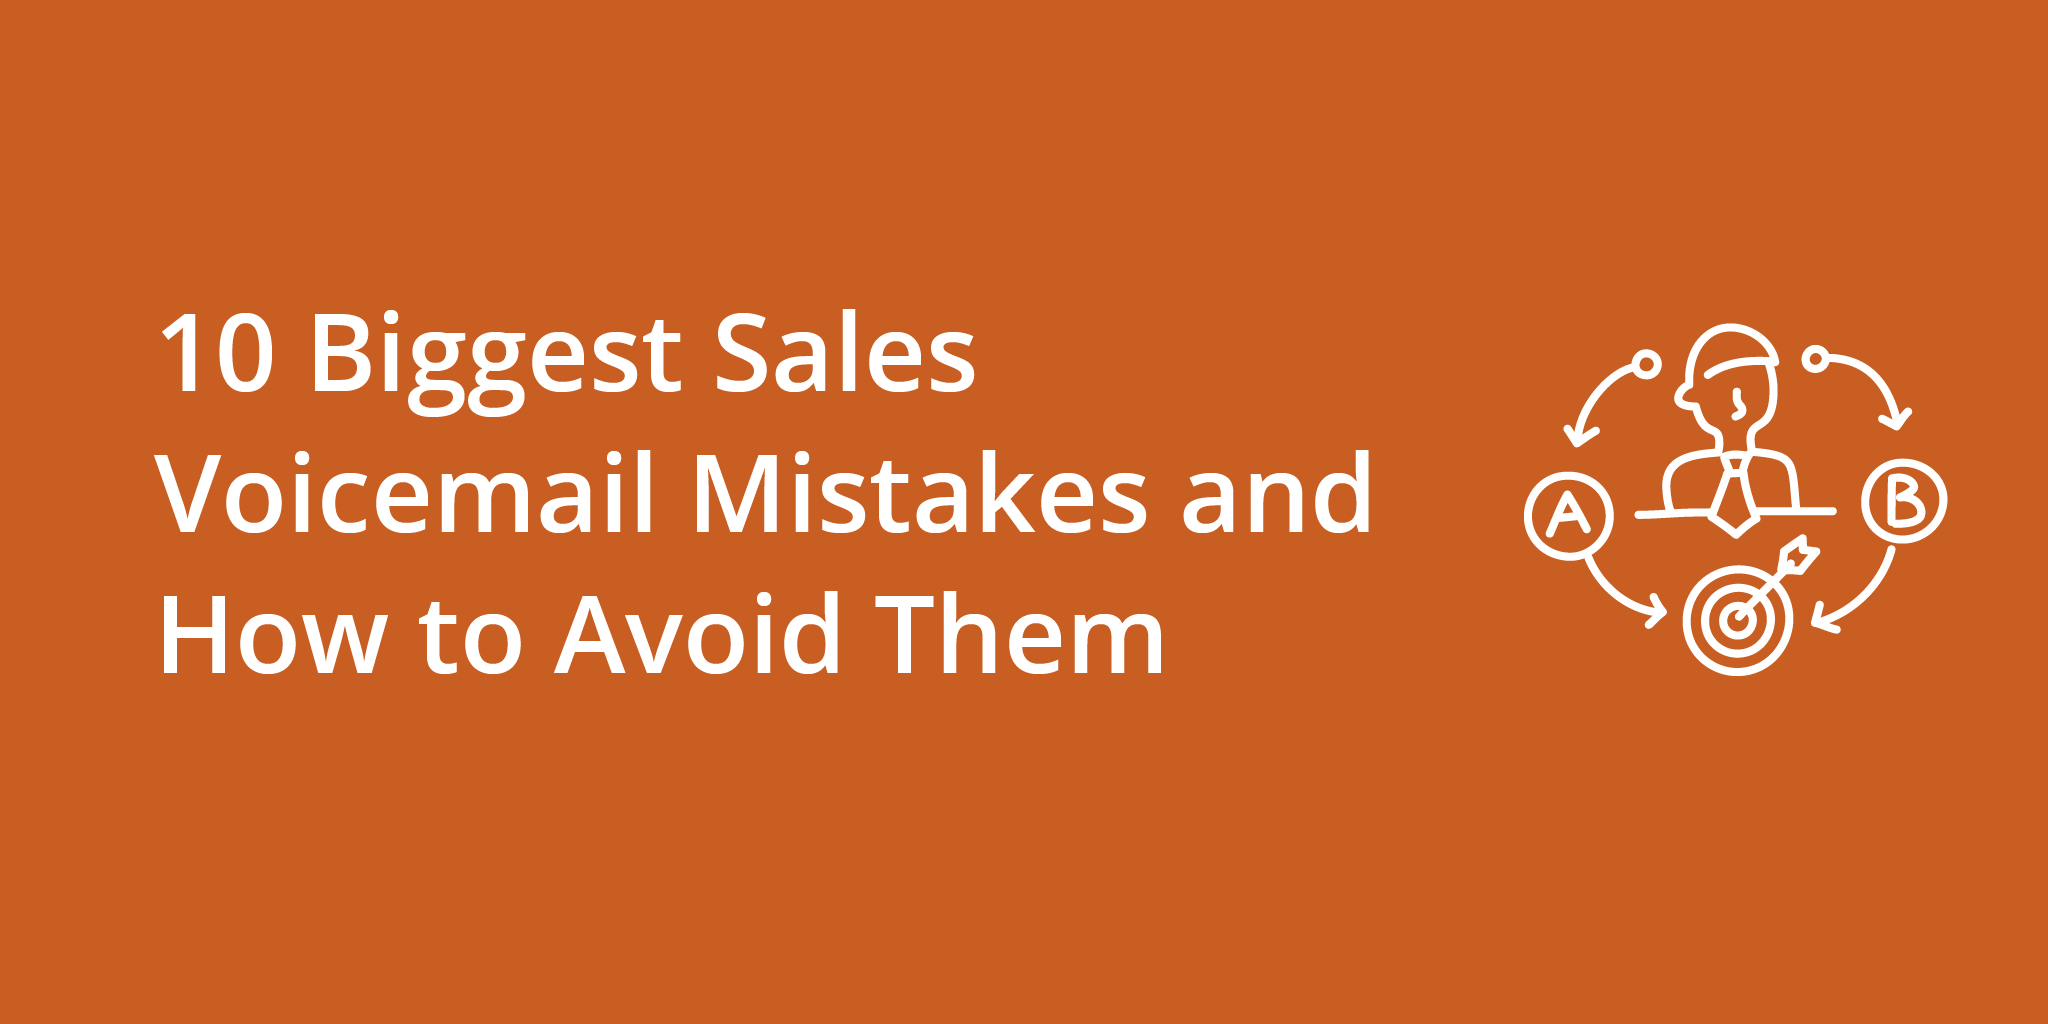 10 Biggest Sales Voicemail Mistakes and How to Avoid Them